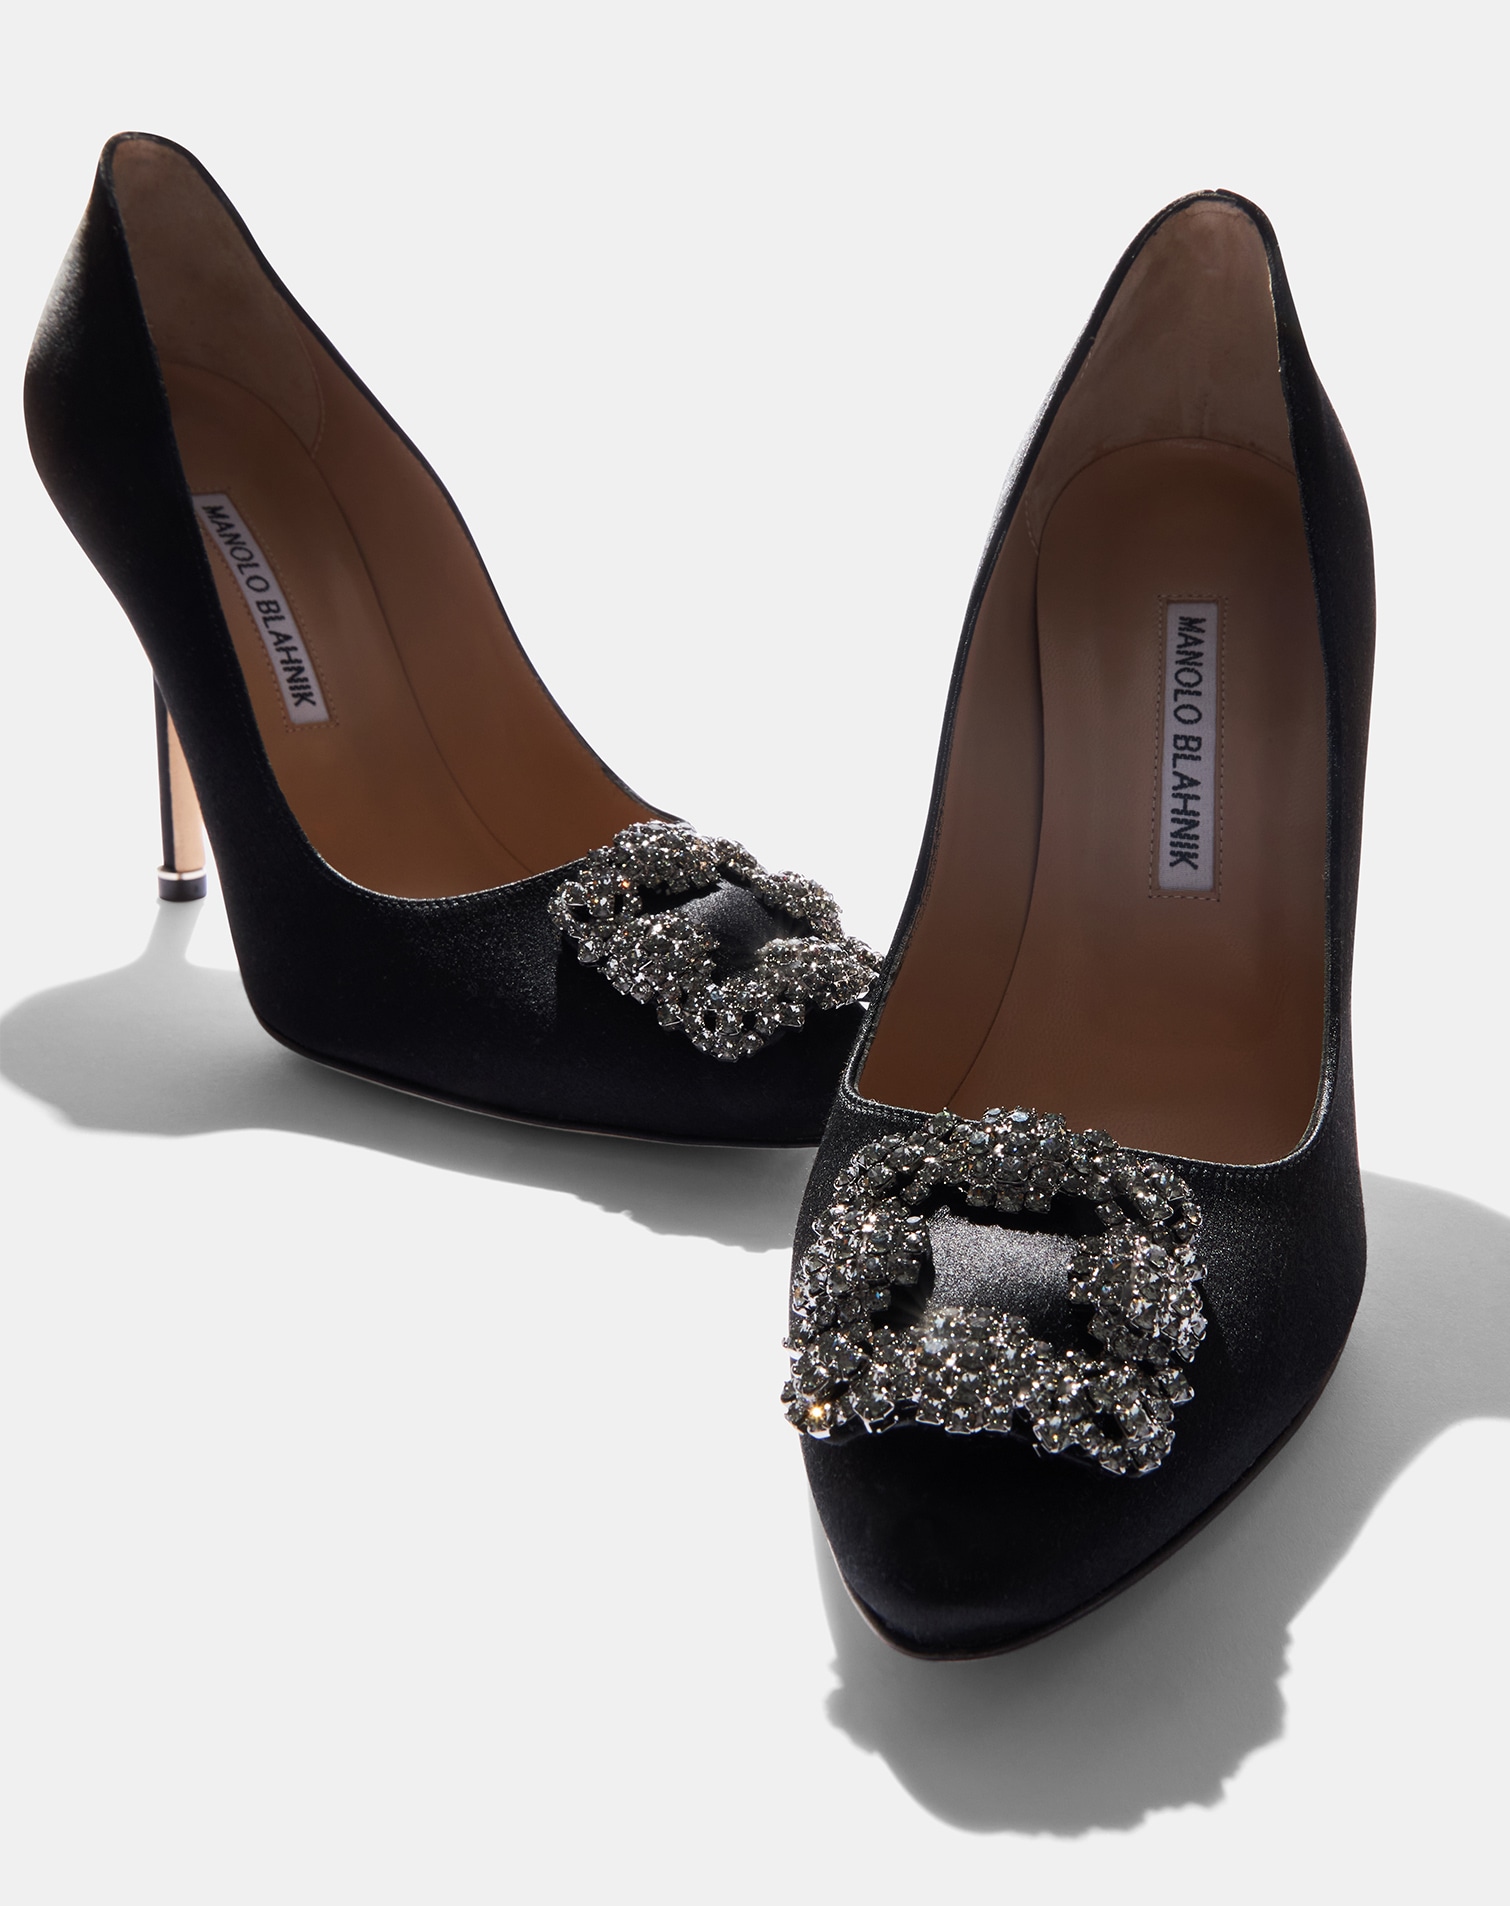 styling chanel flats - Carrie Bradshaw Lied